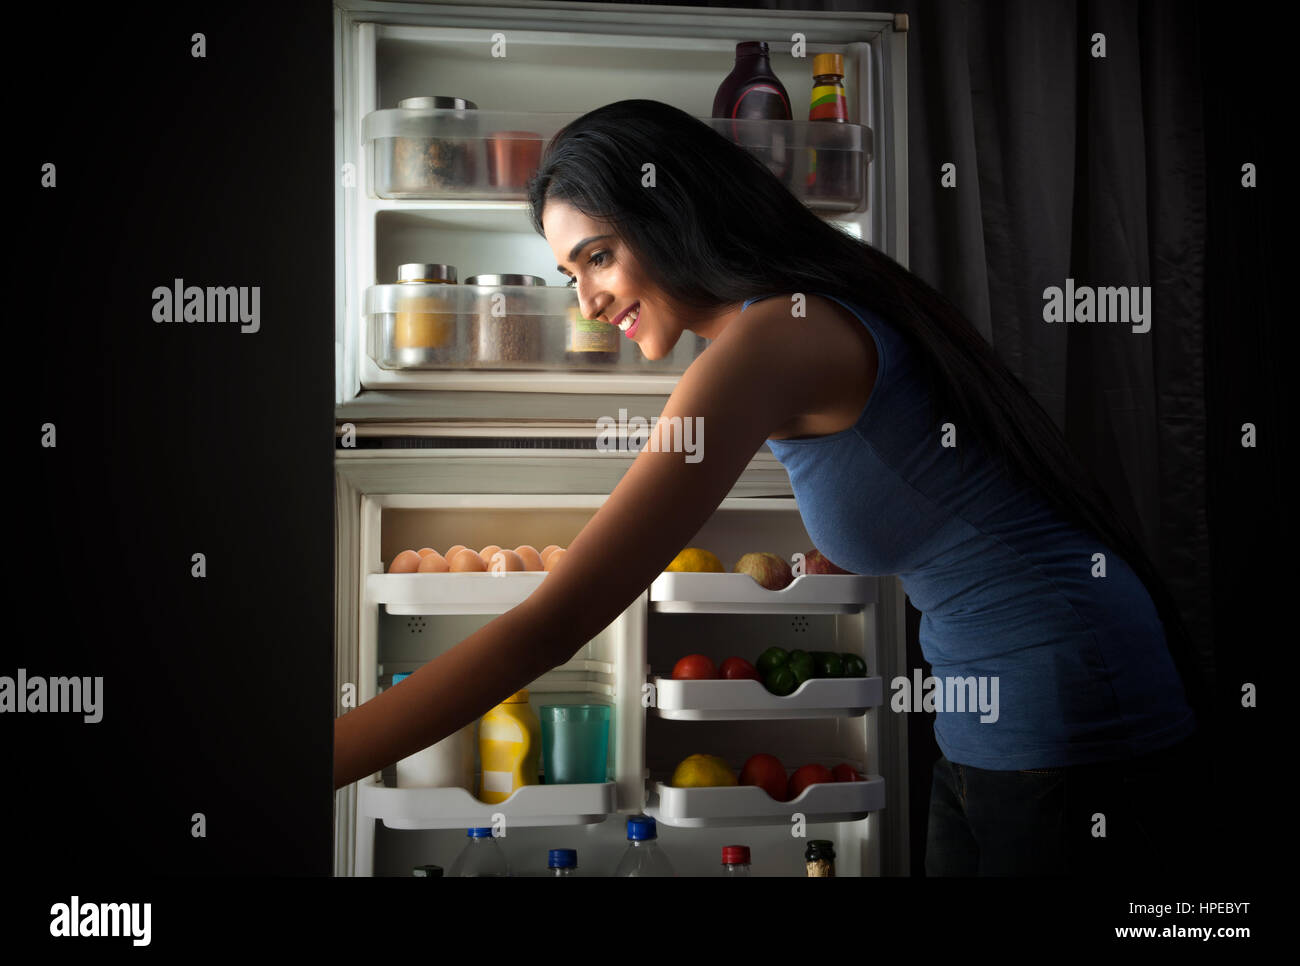 Smiling young woman looking in the fridge at night Stock Photo